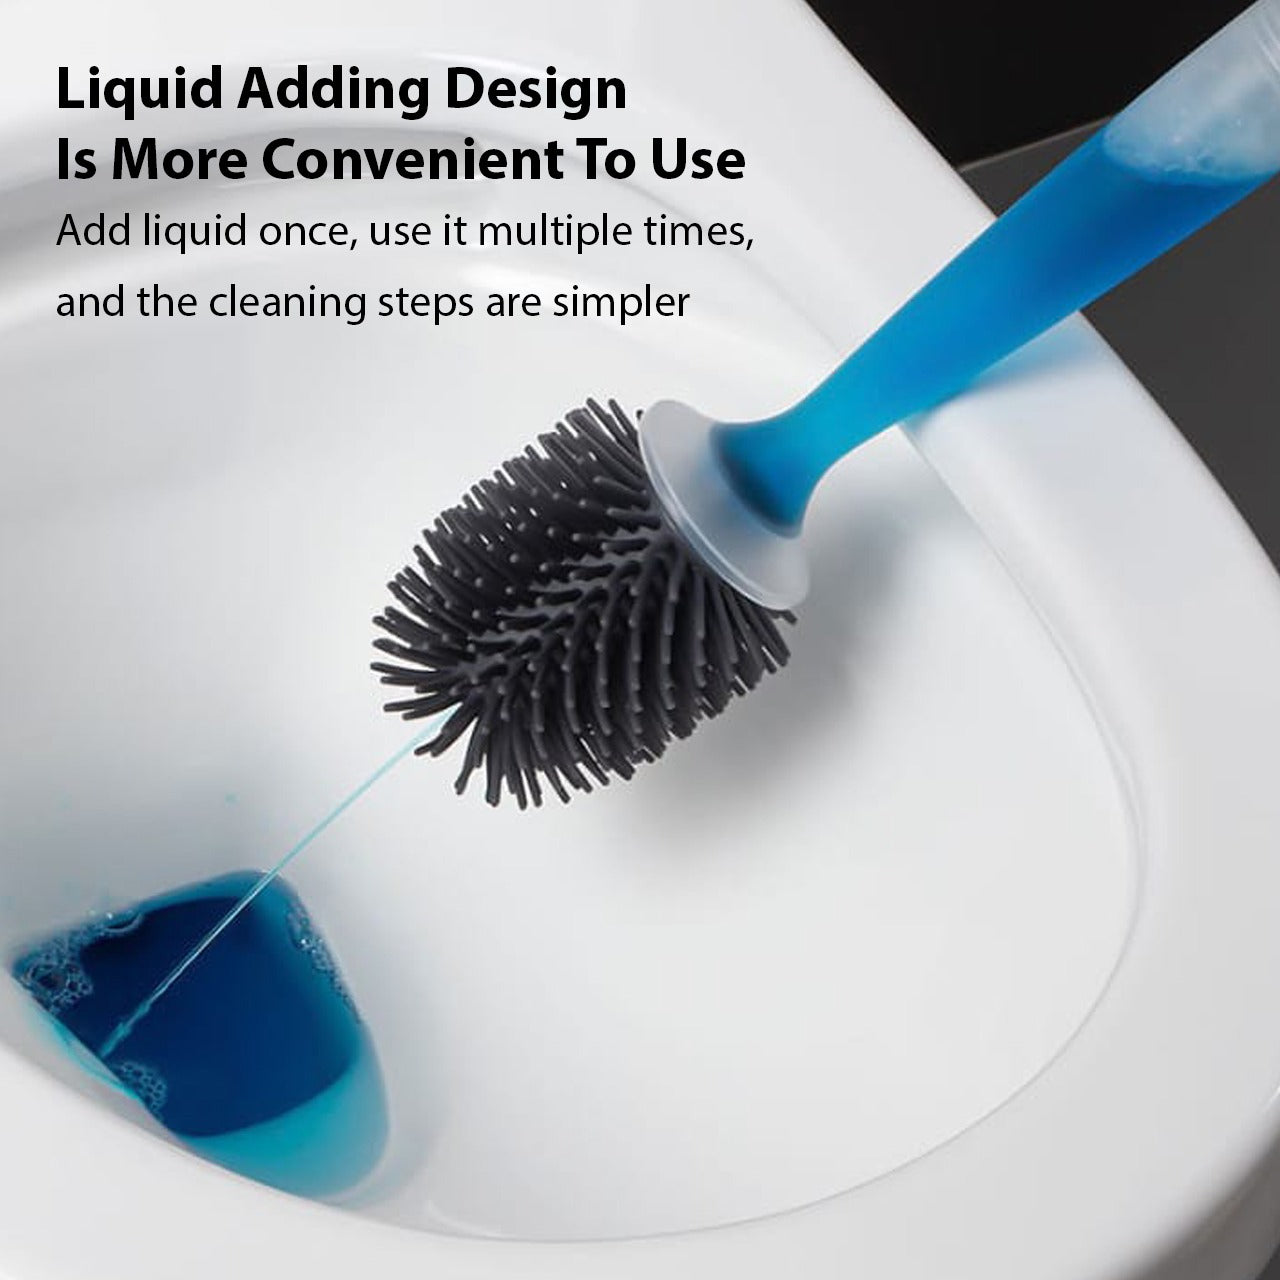 Liquid is Spraying From Refillable Toilet Cleaning Brush.